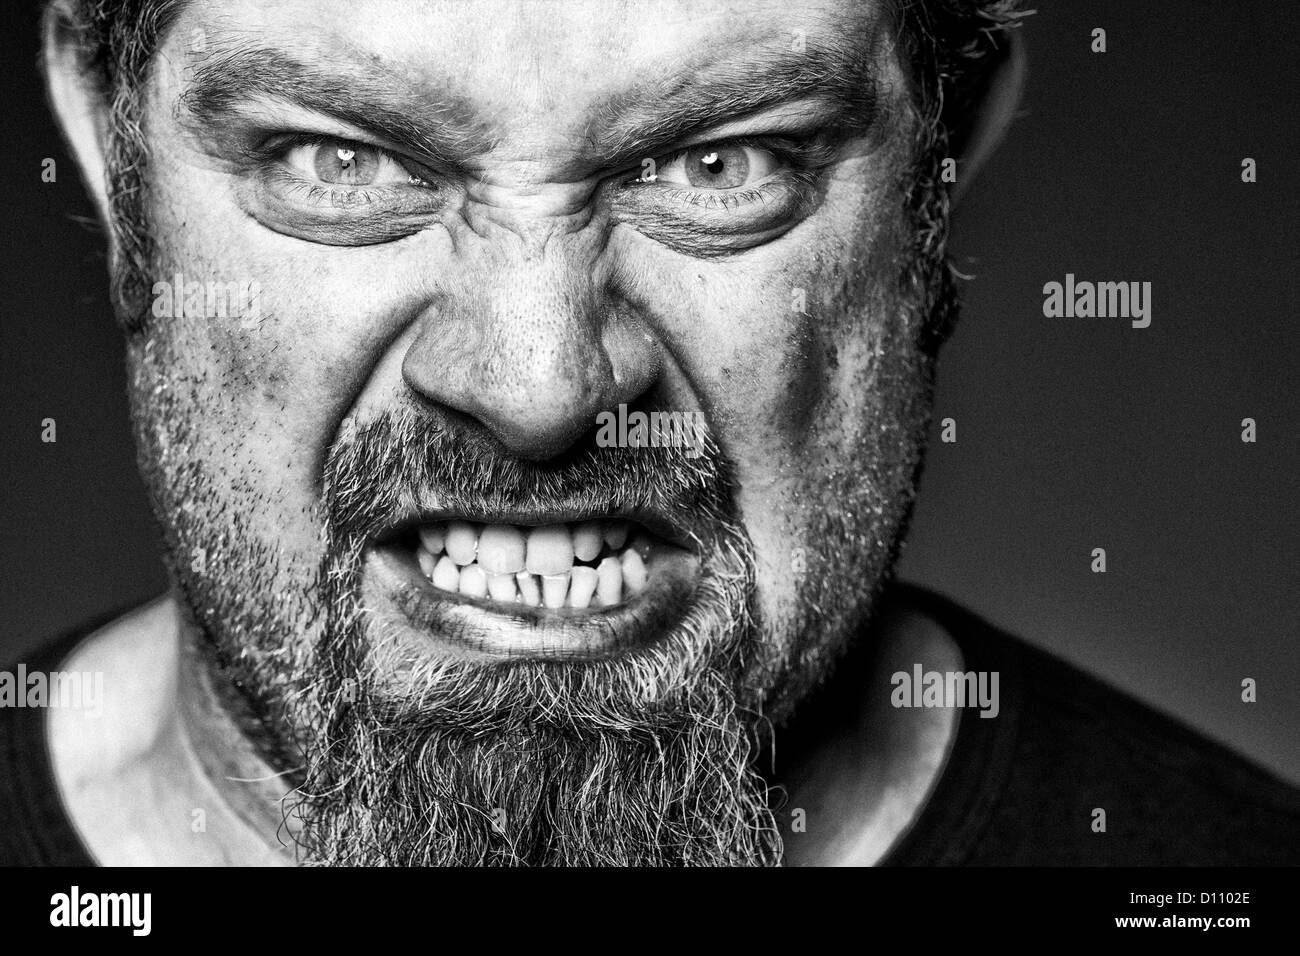 Angry man with sneer on his face. Stock Photo